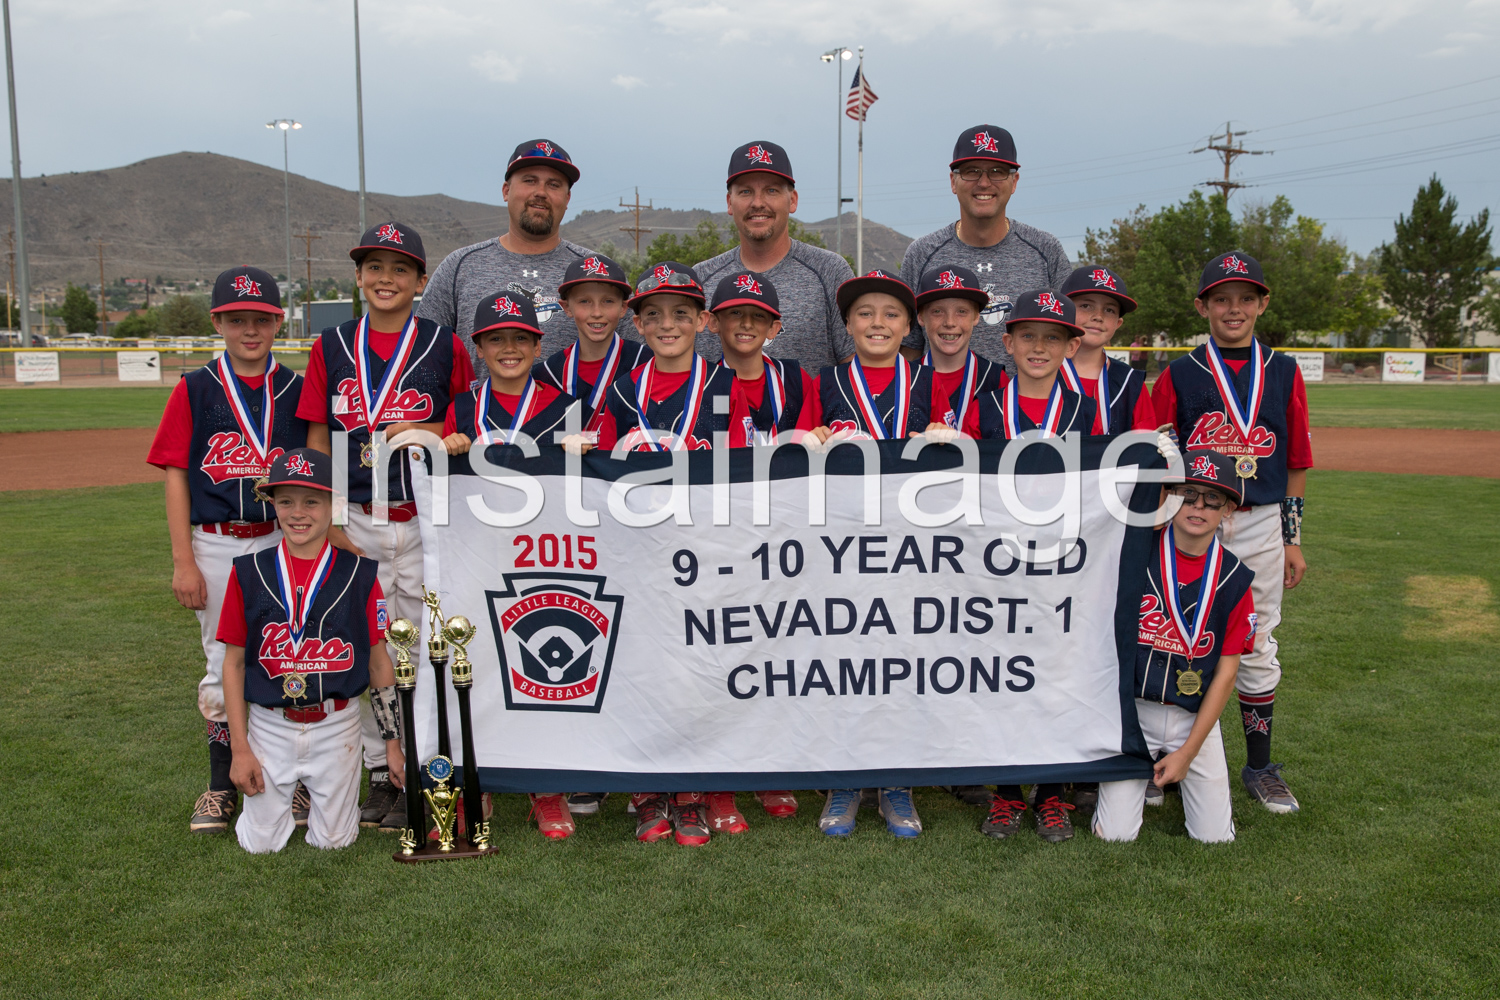 Reno American Little League 10 Year Old Champions